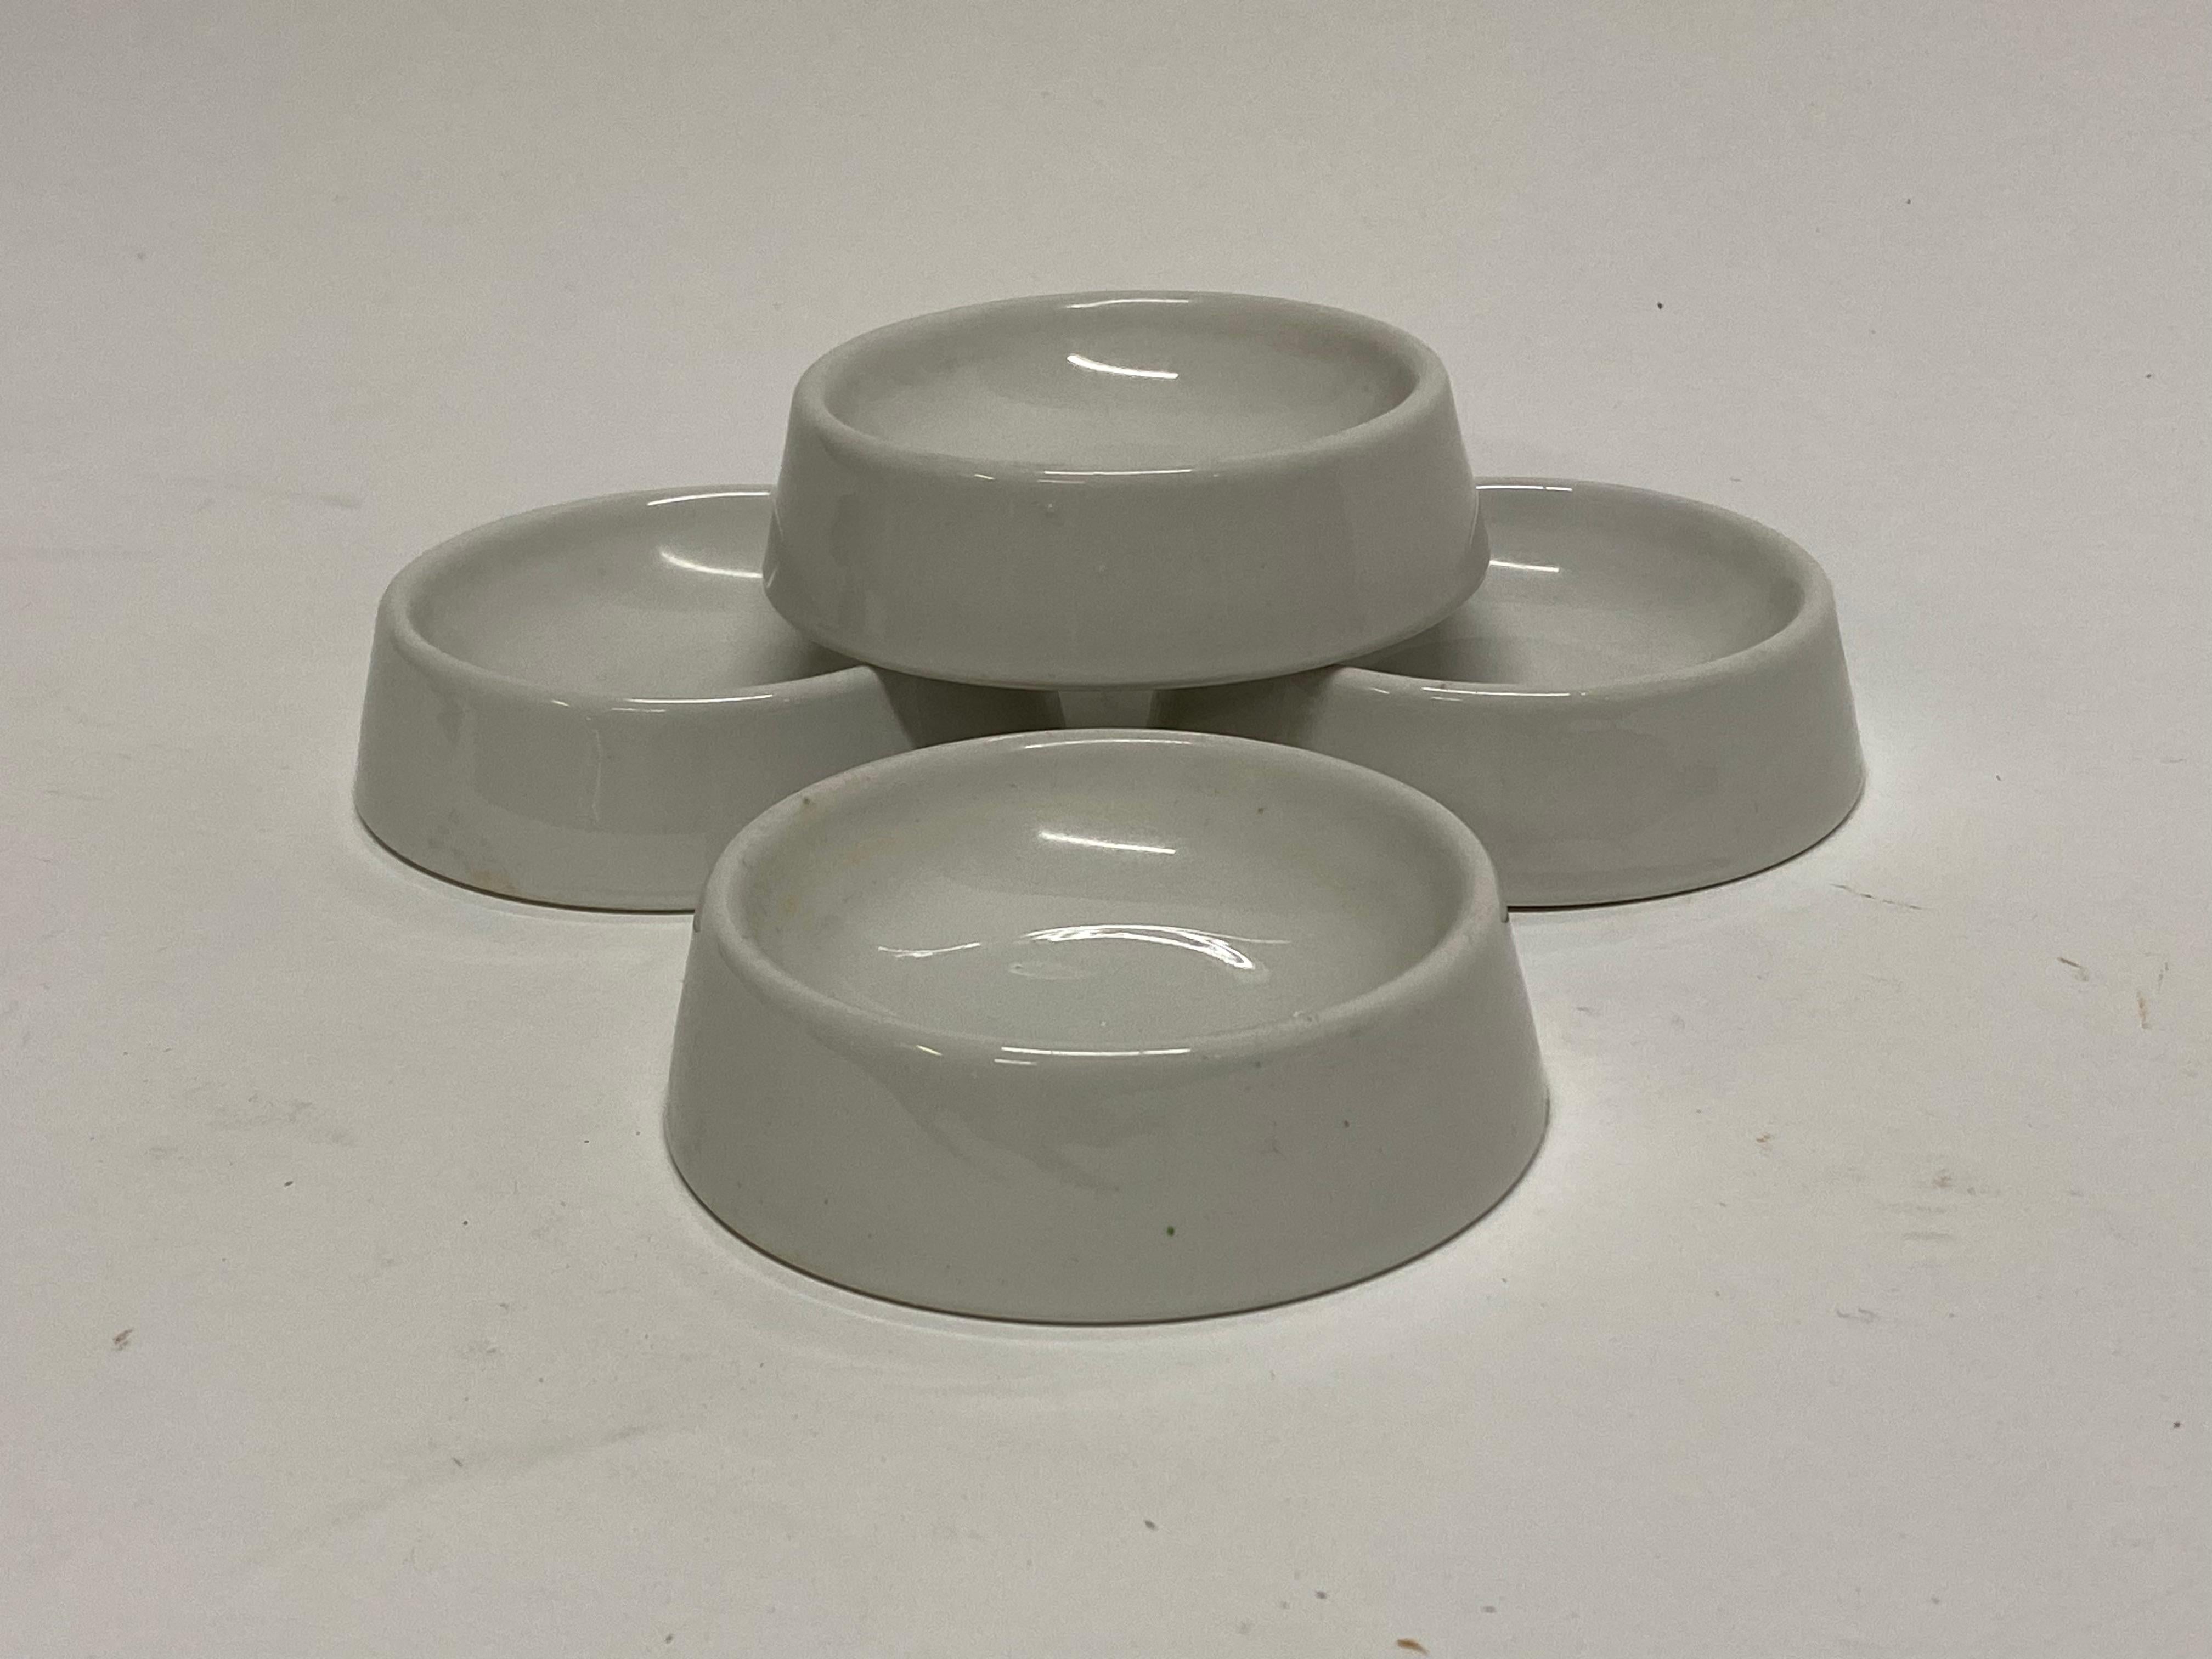 A set of four Alexander Girard designed white glazed porcelain bowls for Mayer China. A La Fonda Del Sol design. Fully signed on the bottom, A La Fonda Del Sol Design, Mayer China-Minners, 4 S Inc. Girard's iconic furniture, textile and decorative